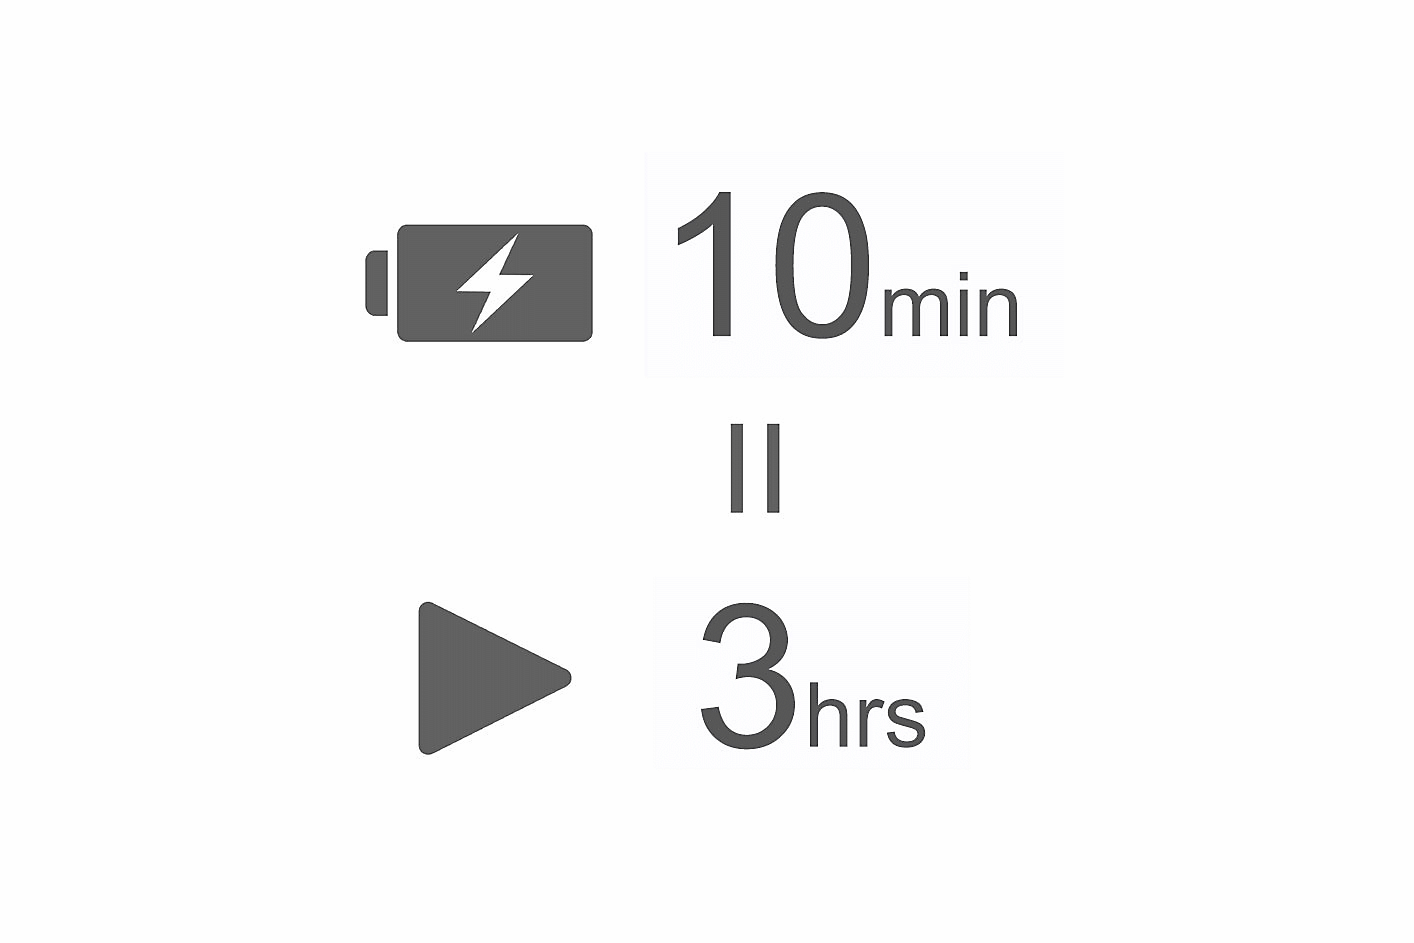 Image of a battery icon with a lightning bolt symbol on it and 10min text above an equals sign and a play icon with 3hrs text